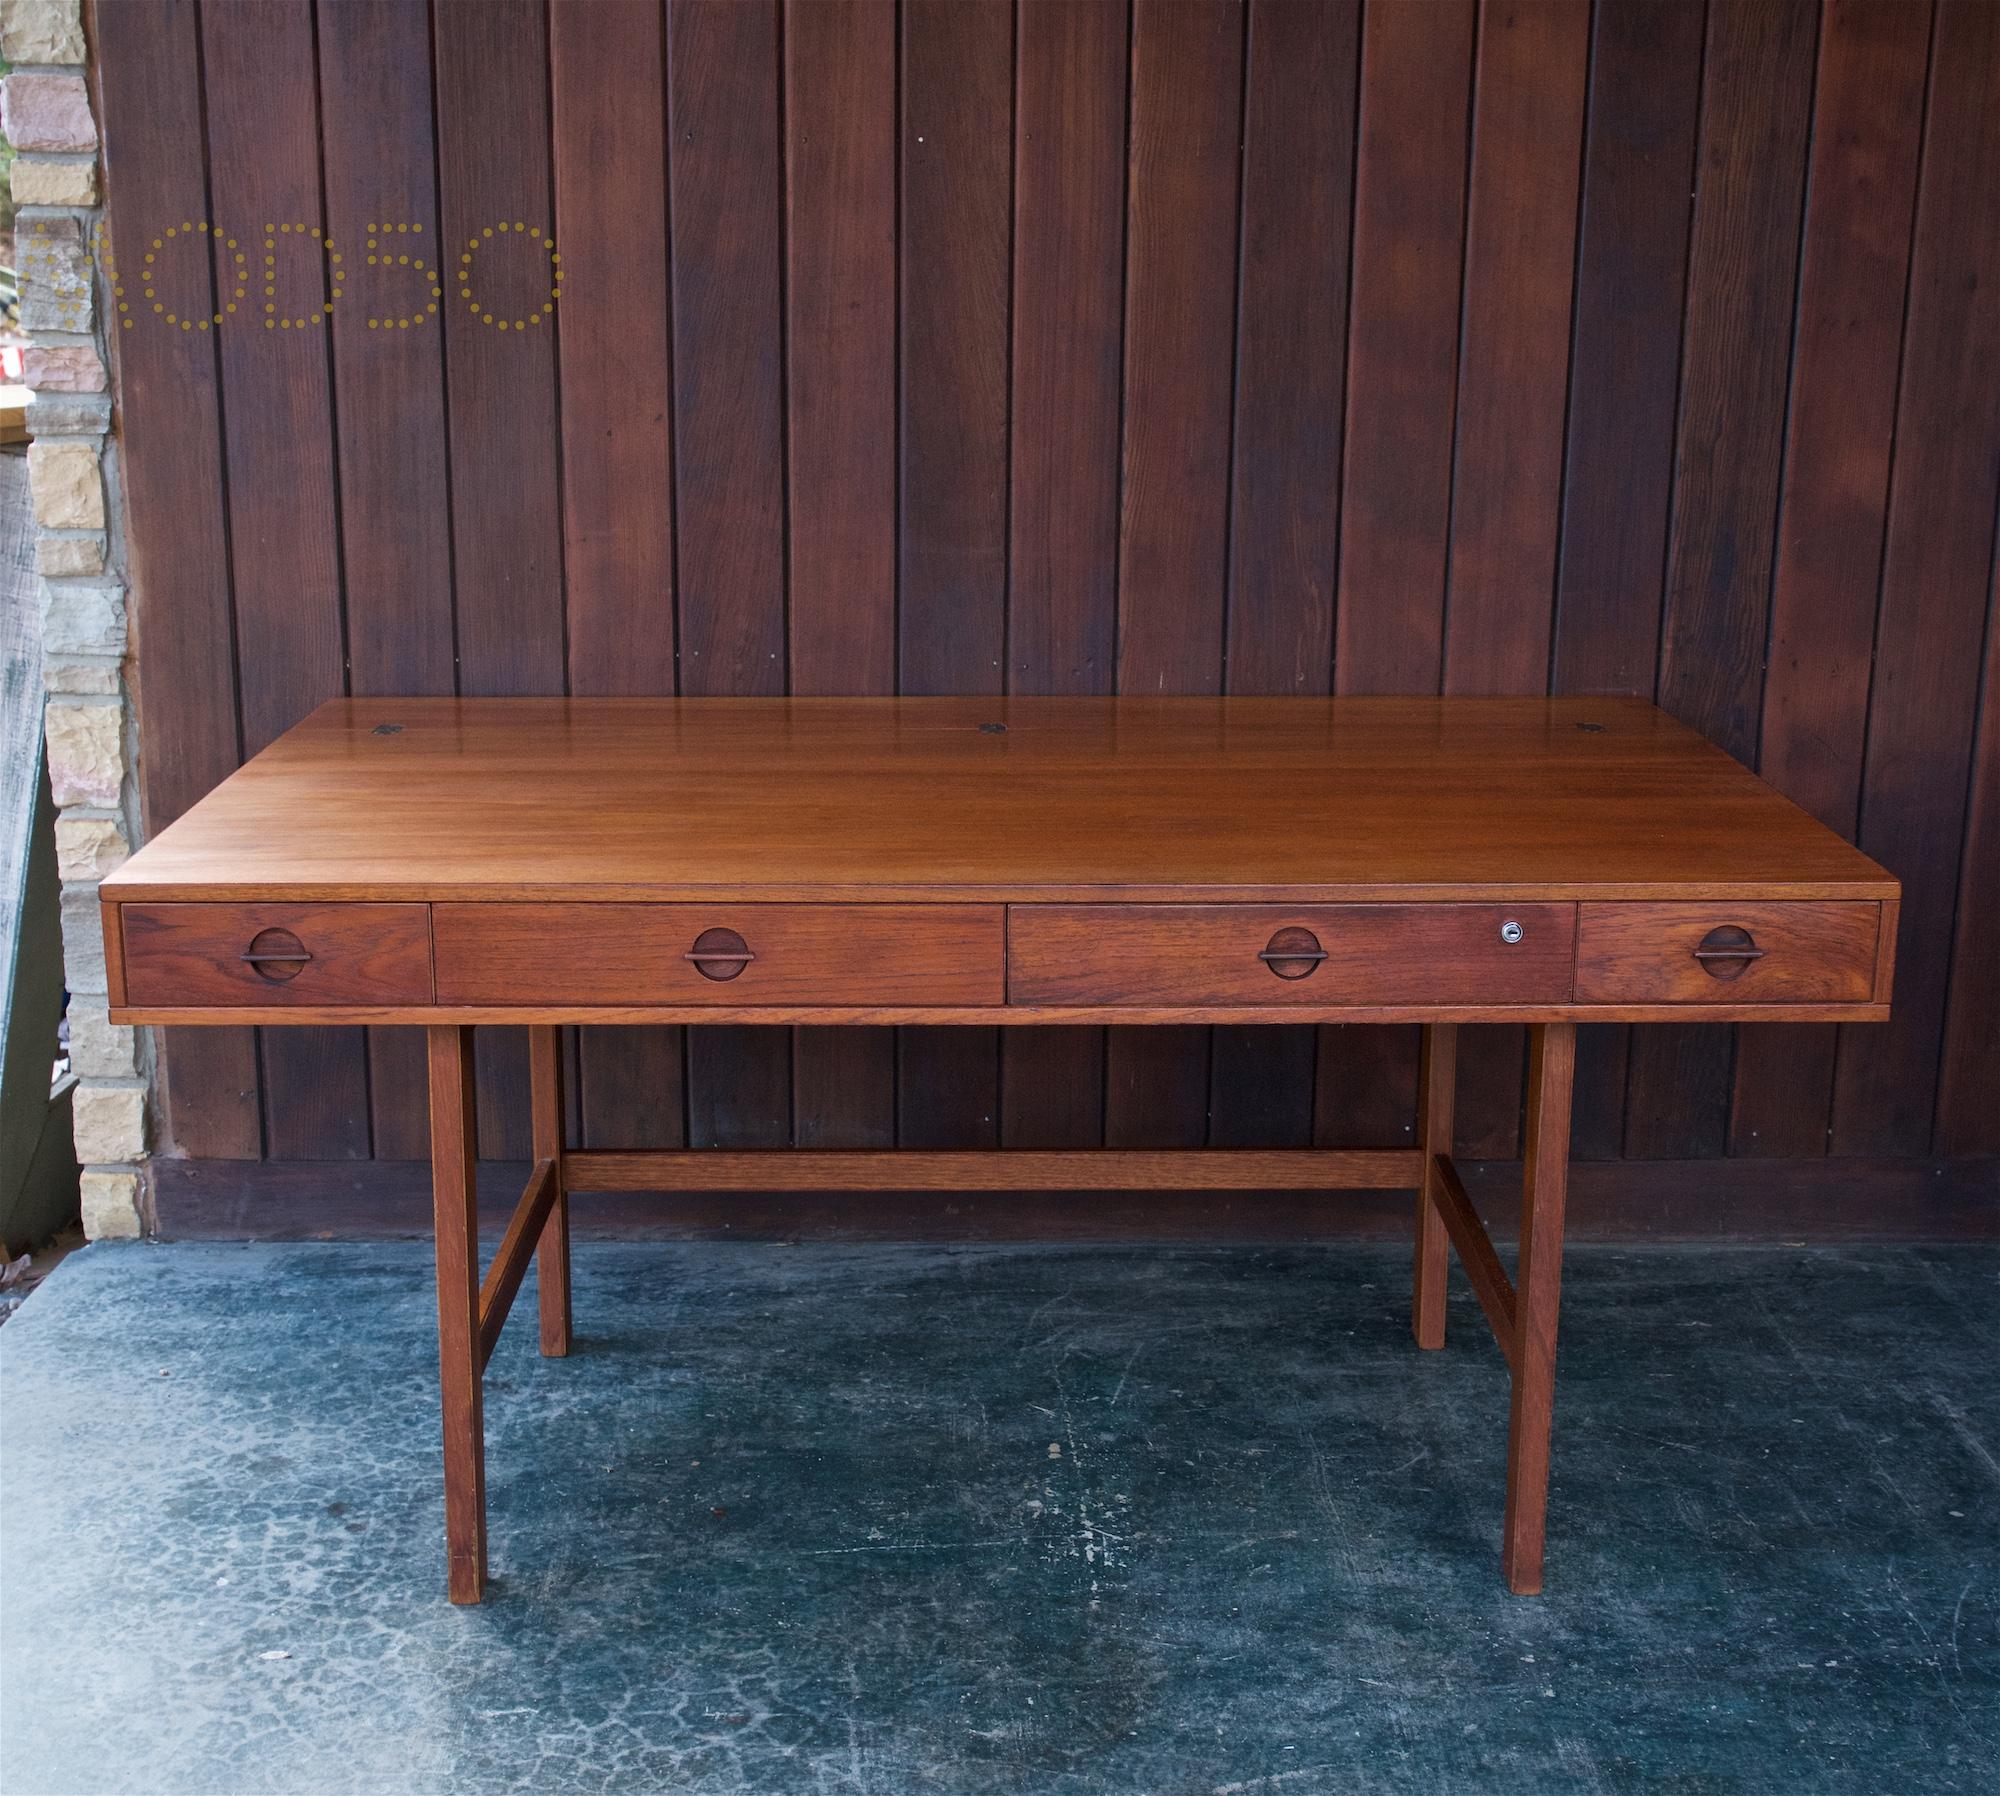 Wonderful dark hued teak desk, fully functional, but heavily patinated. Designed by Peter Løvig Nielsen, this ingenious desk has a shelf that flips, creating a flat work surface. Ideal as a shared desk for studio or office. Full surface measures: